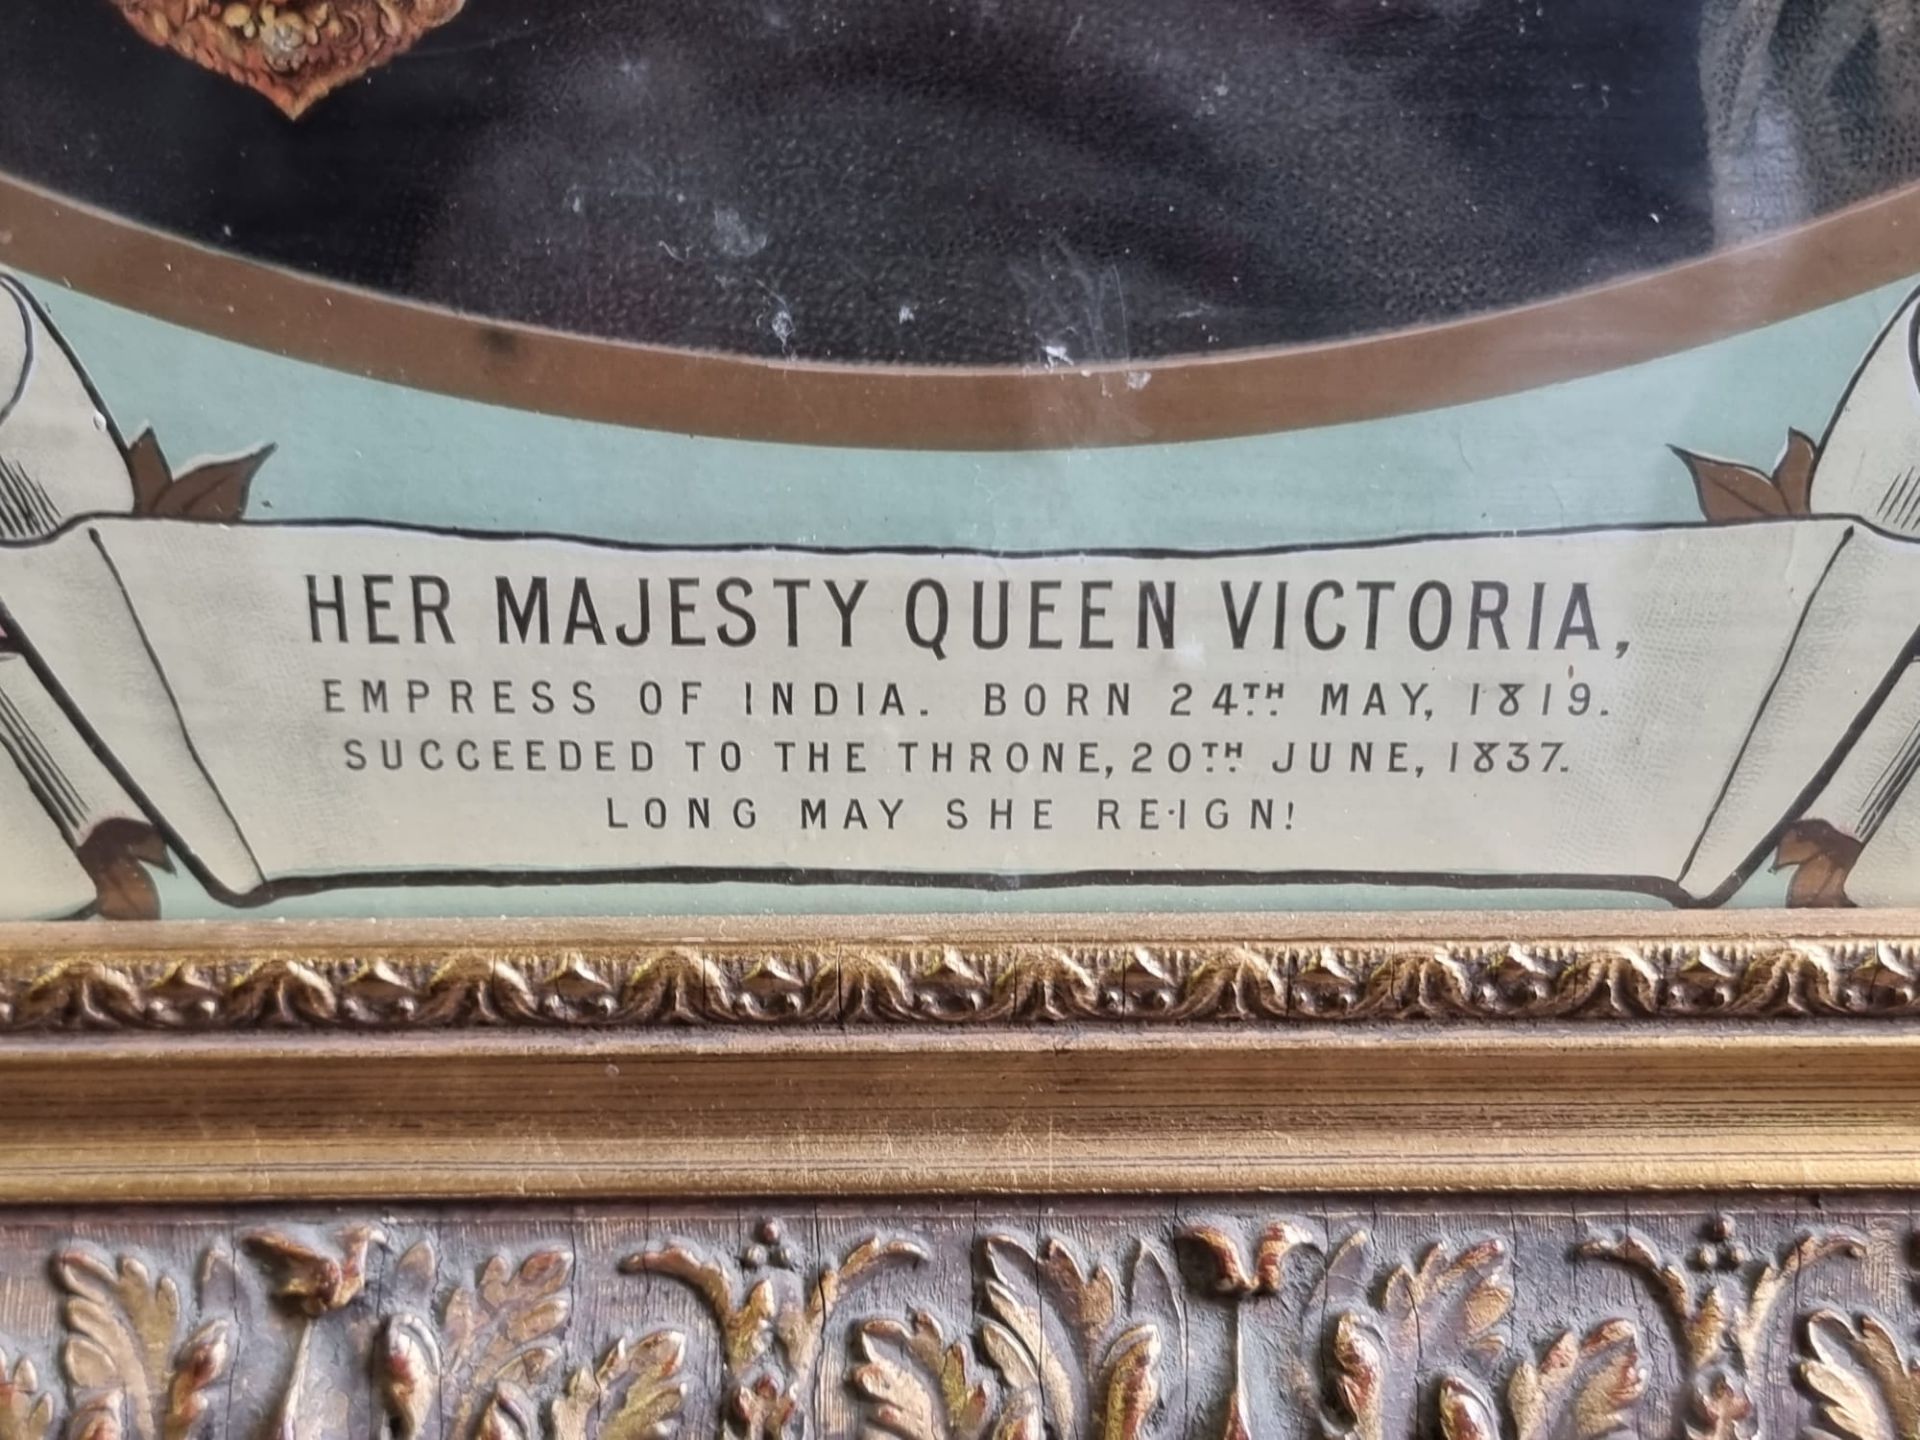 A Framed Print Of Queen Victoria With Inscription Plate Under Her Majesty Queen Victoria Empress - Image 7 of 9